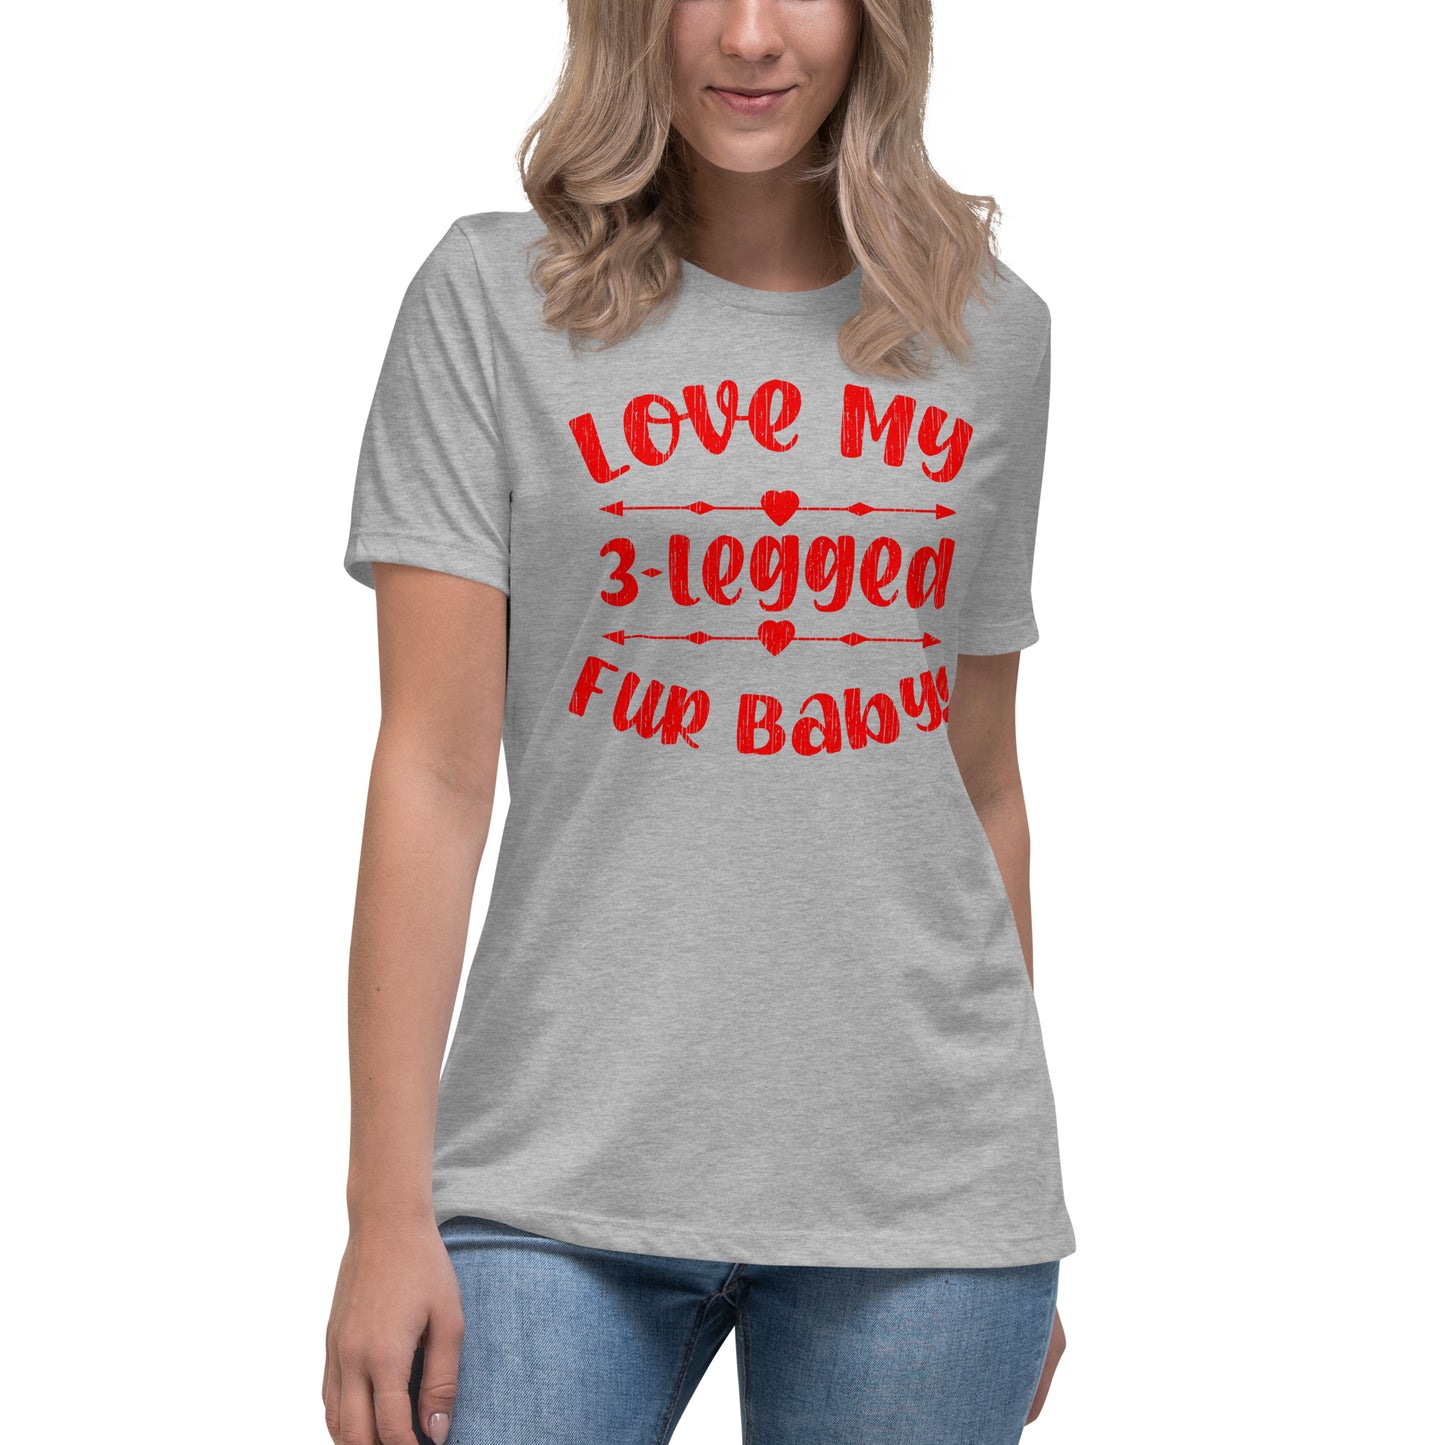 Love my 3-legged fur baby women’s relaxed fit t-shirts by Dog Artistry athletic heather